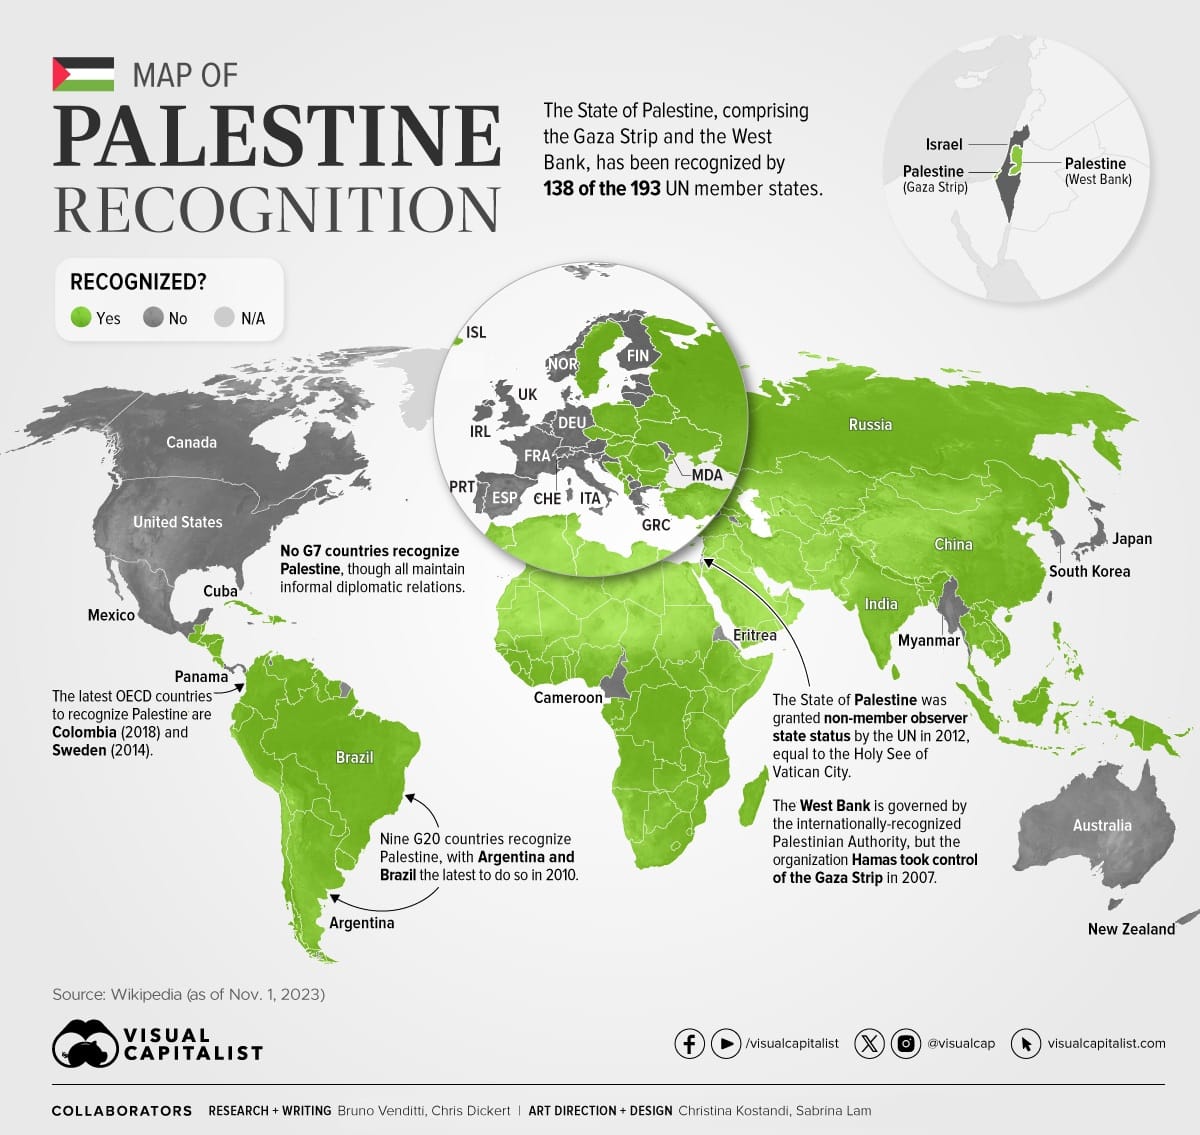 Recognition of Palestine